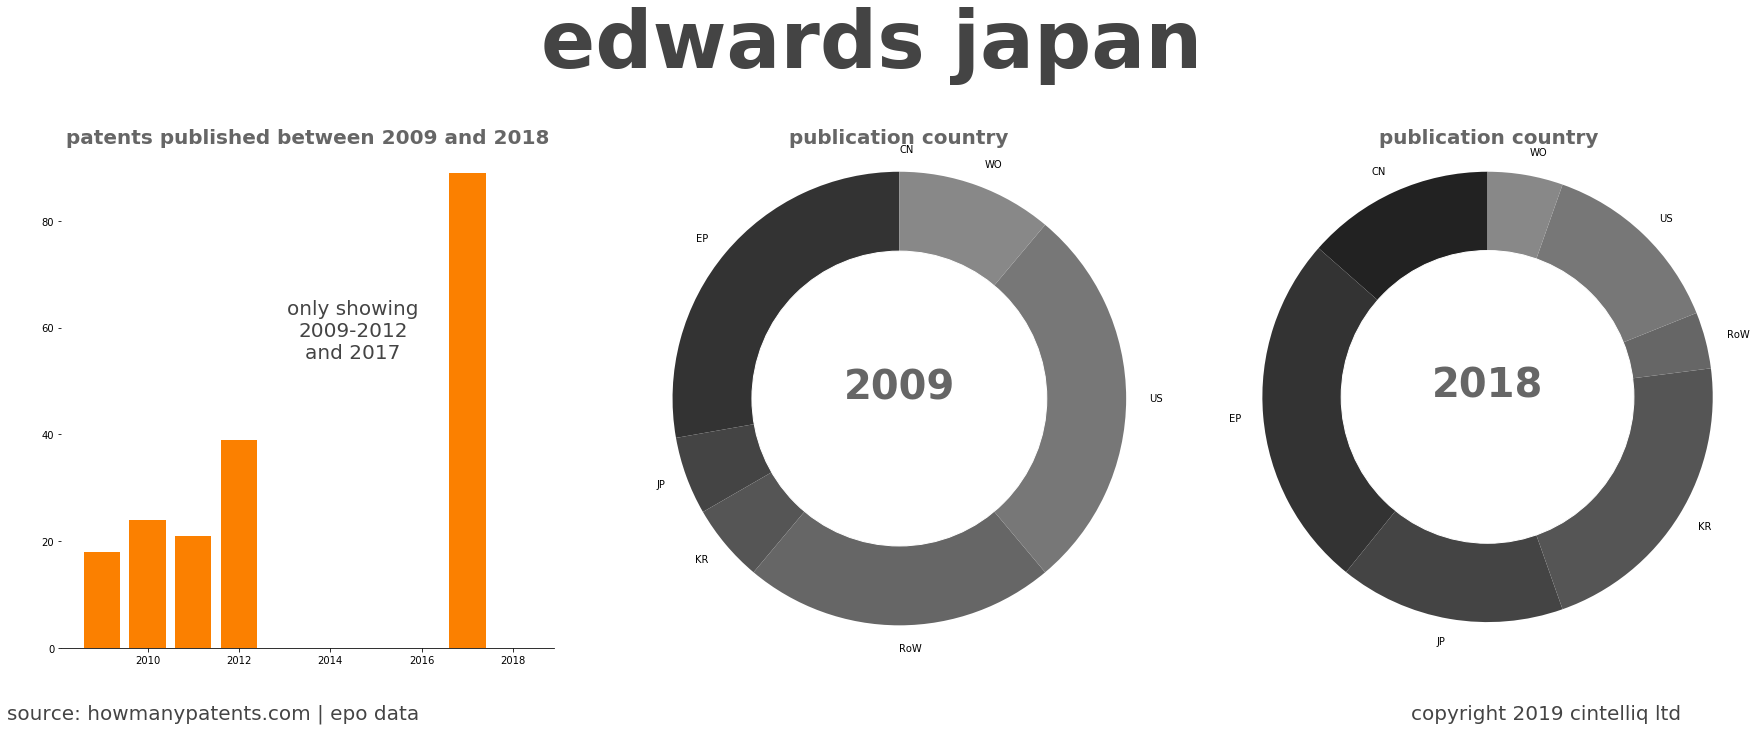 summary of patents for Edwards Japan